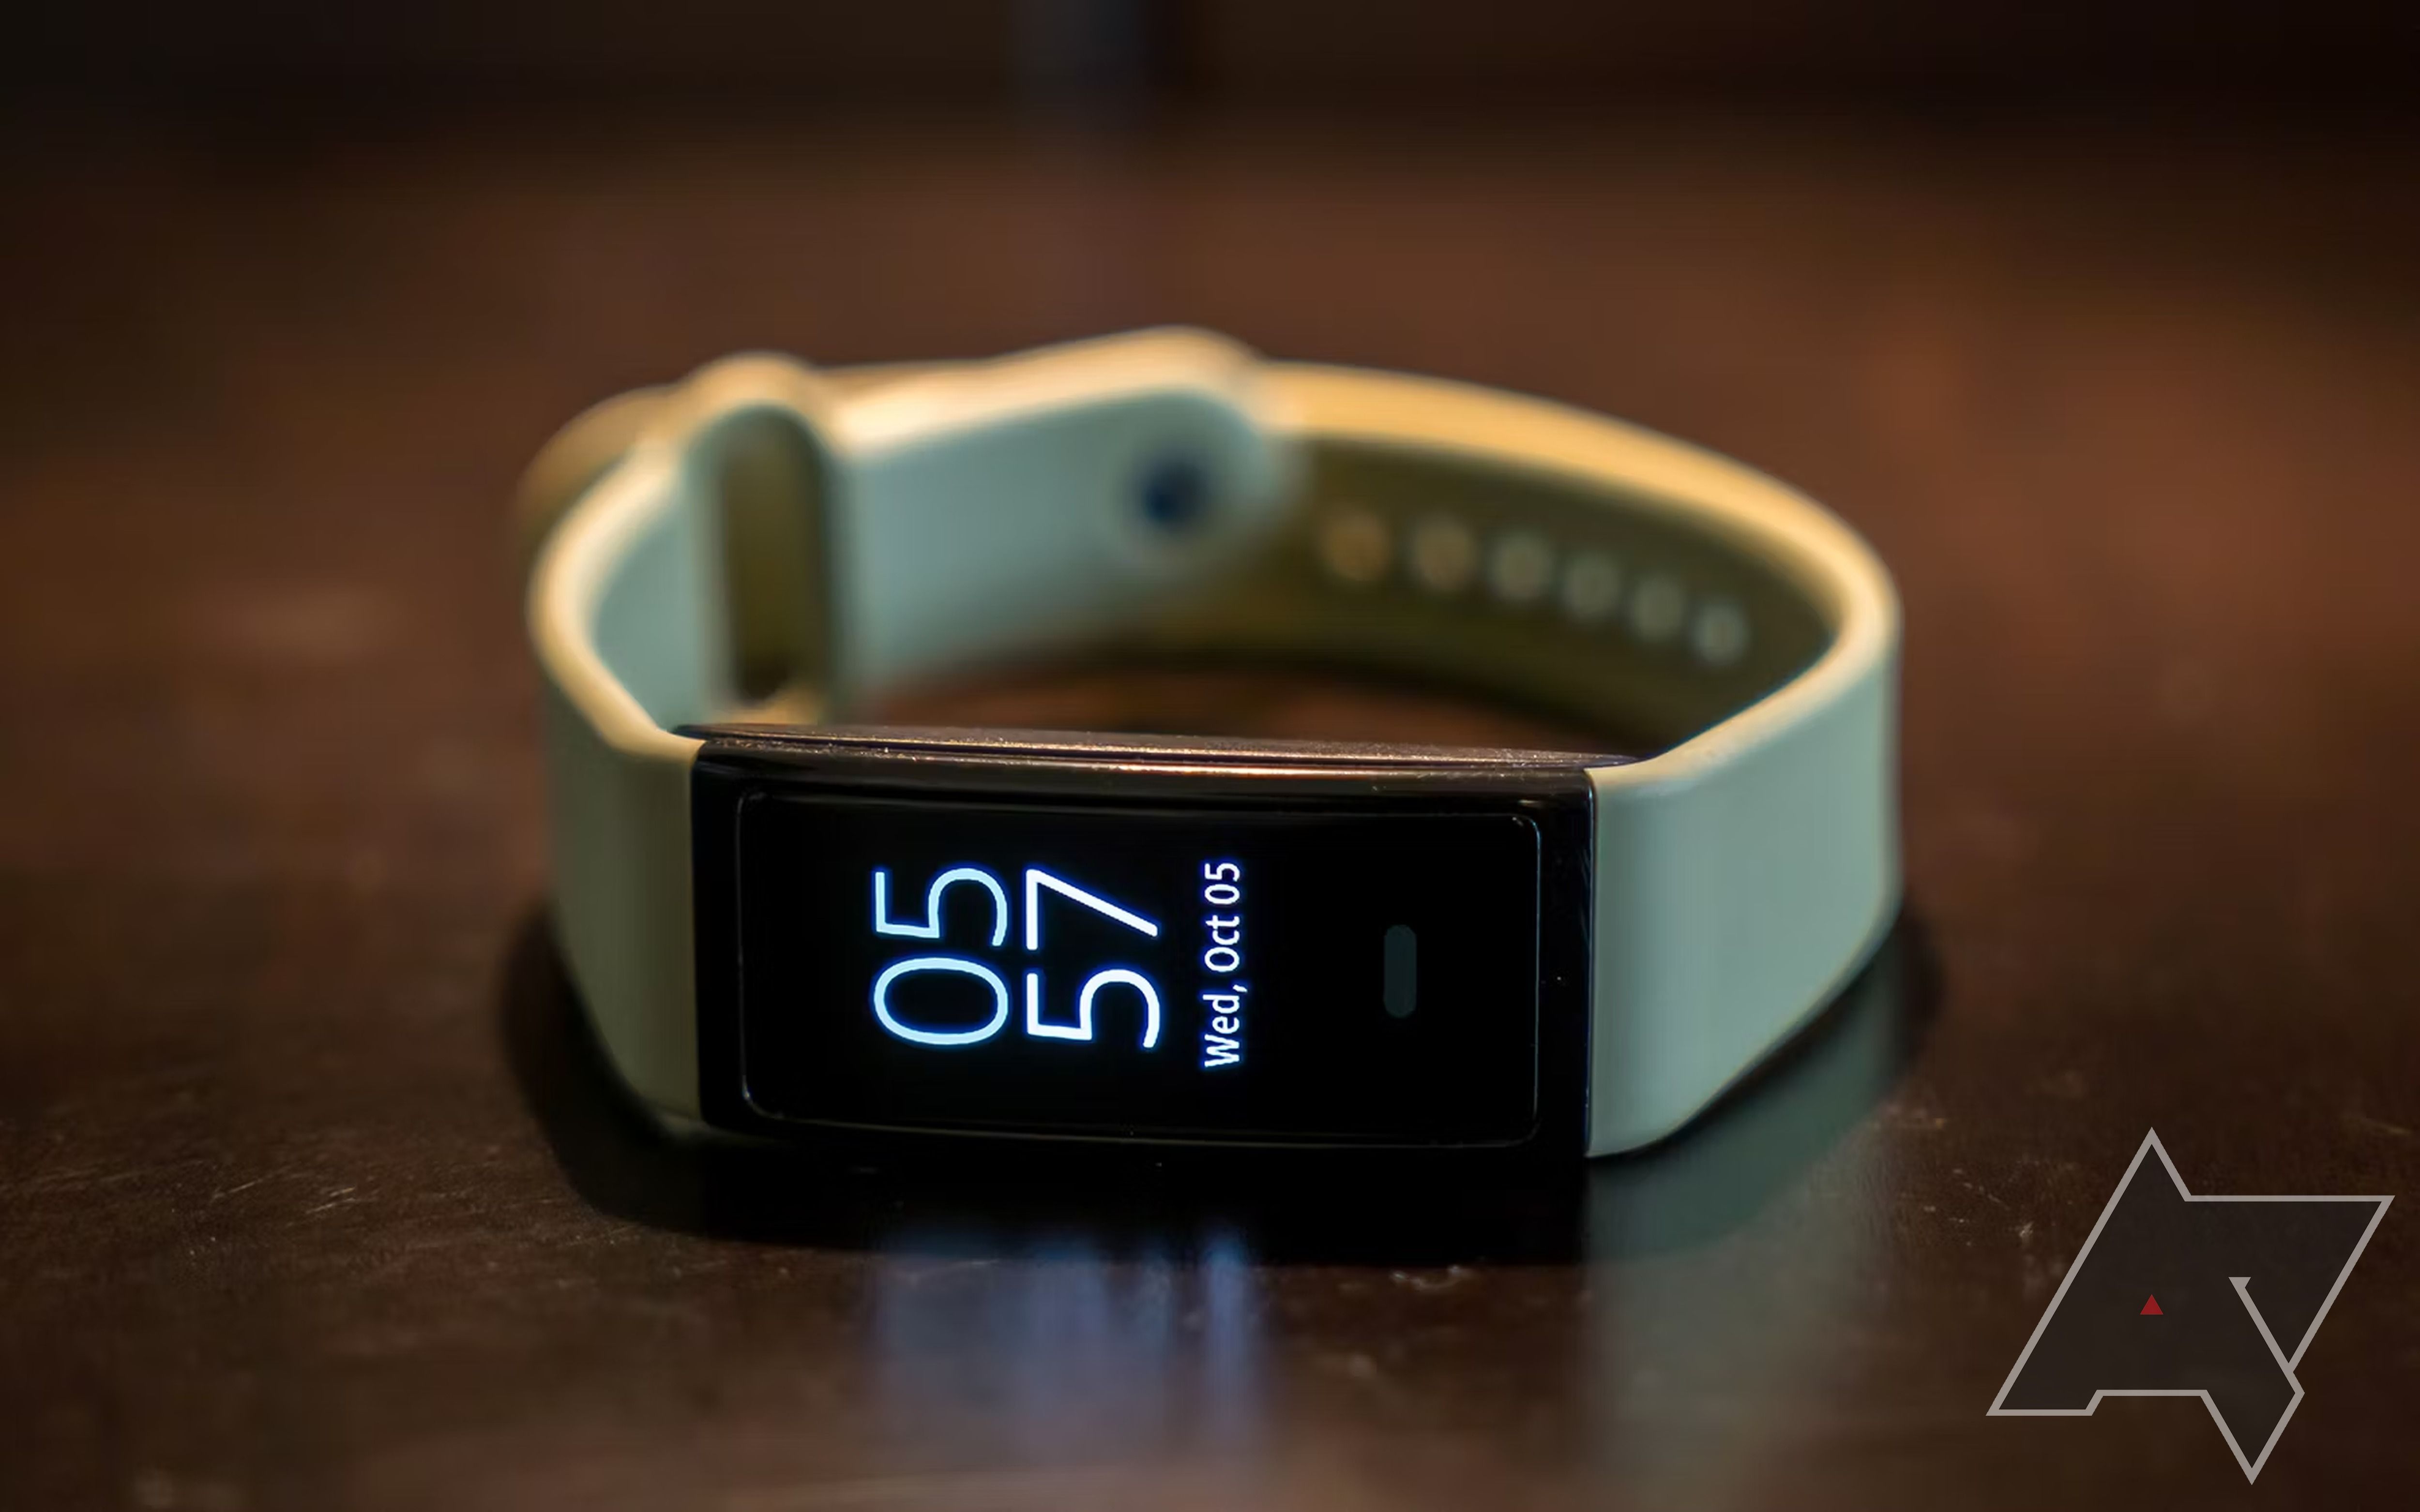 Halo View review: This $79 fitness tracker excels at the basics